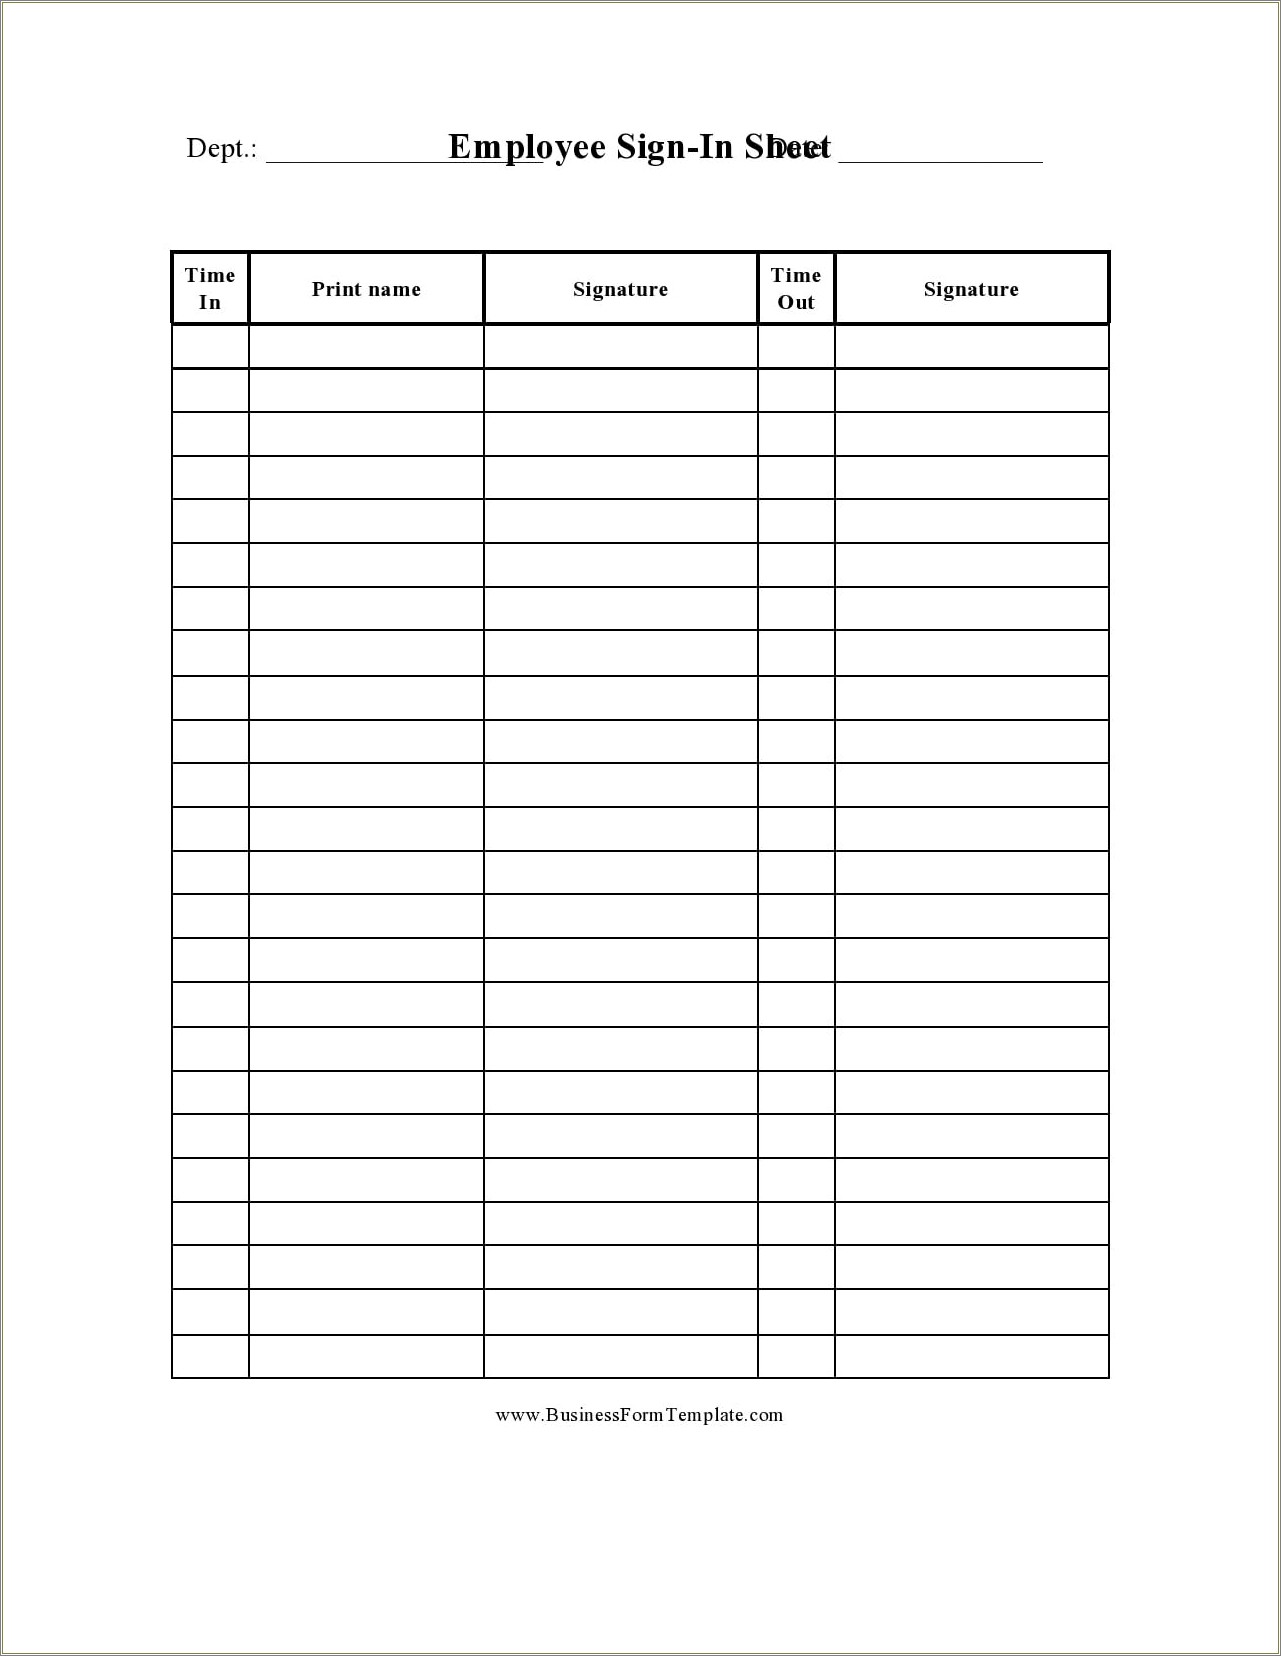 Free Company Equipment Sign Out Sheet Template